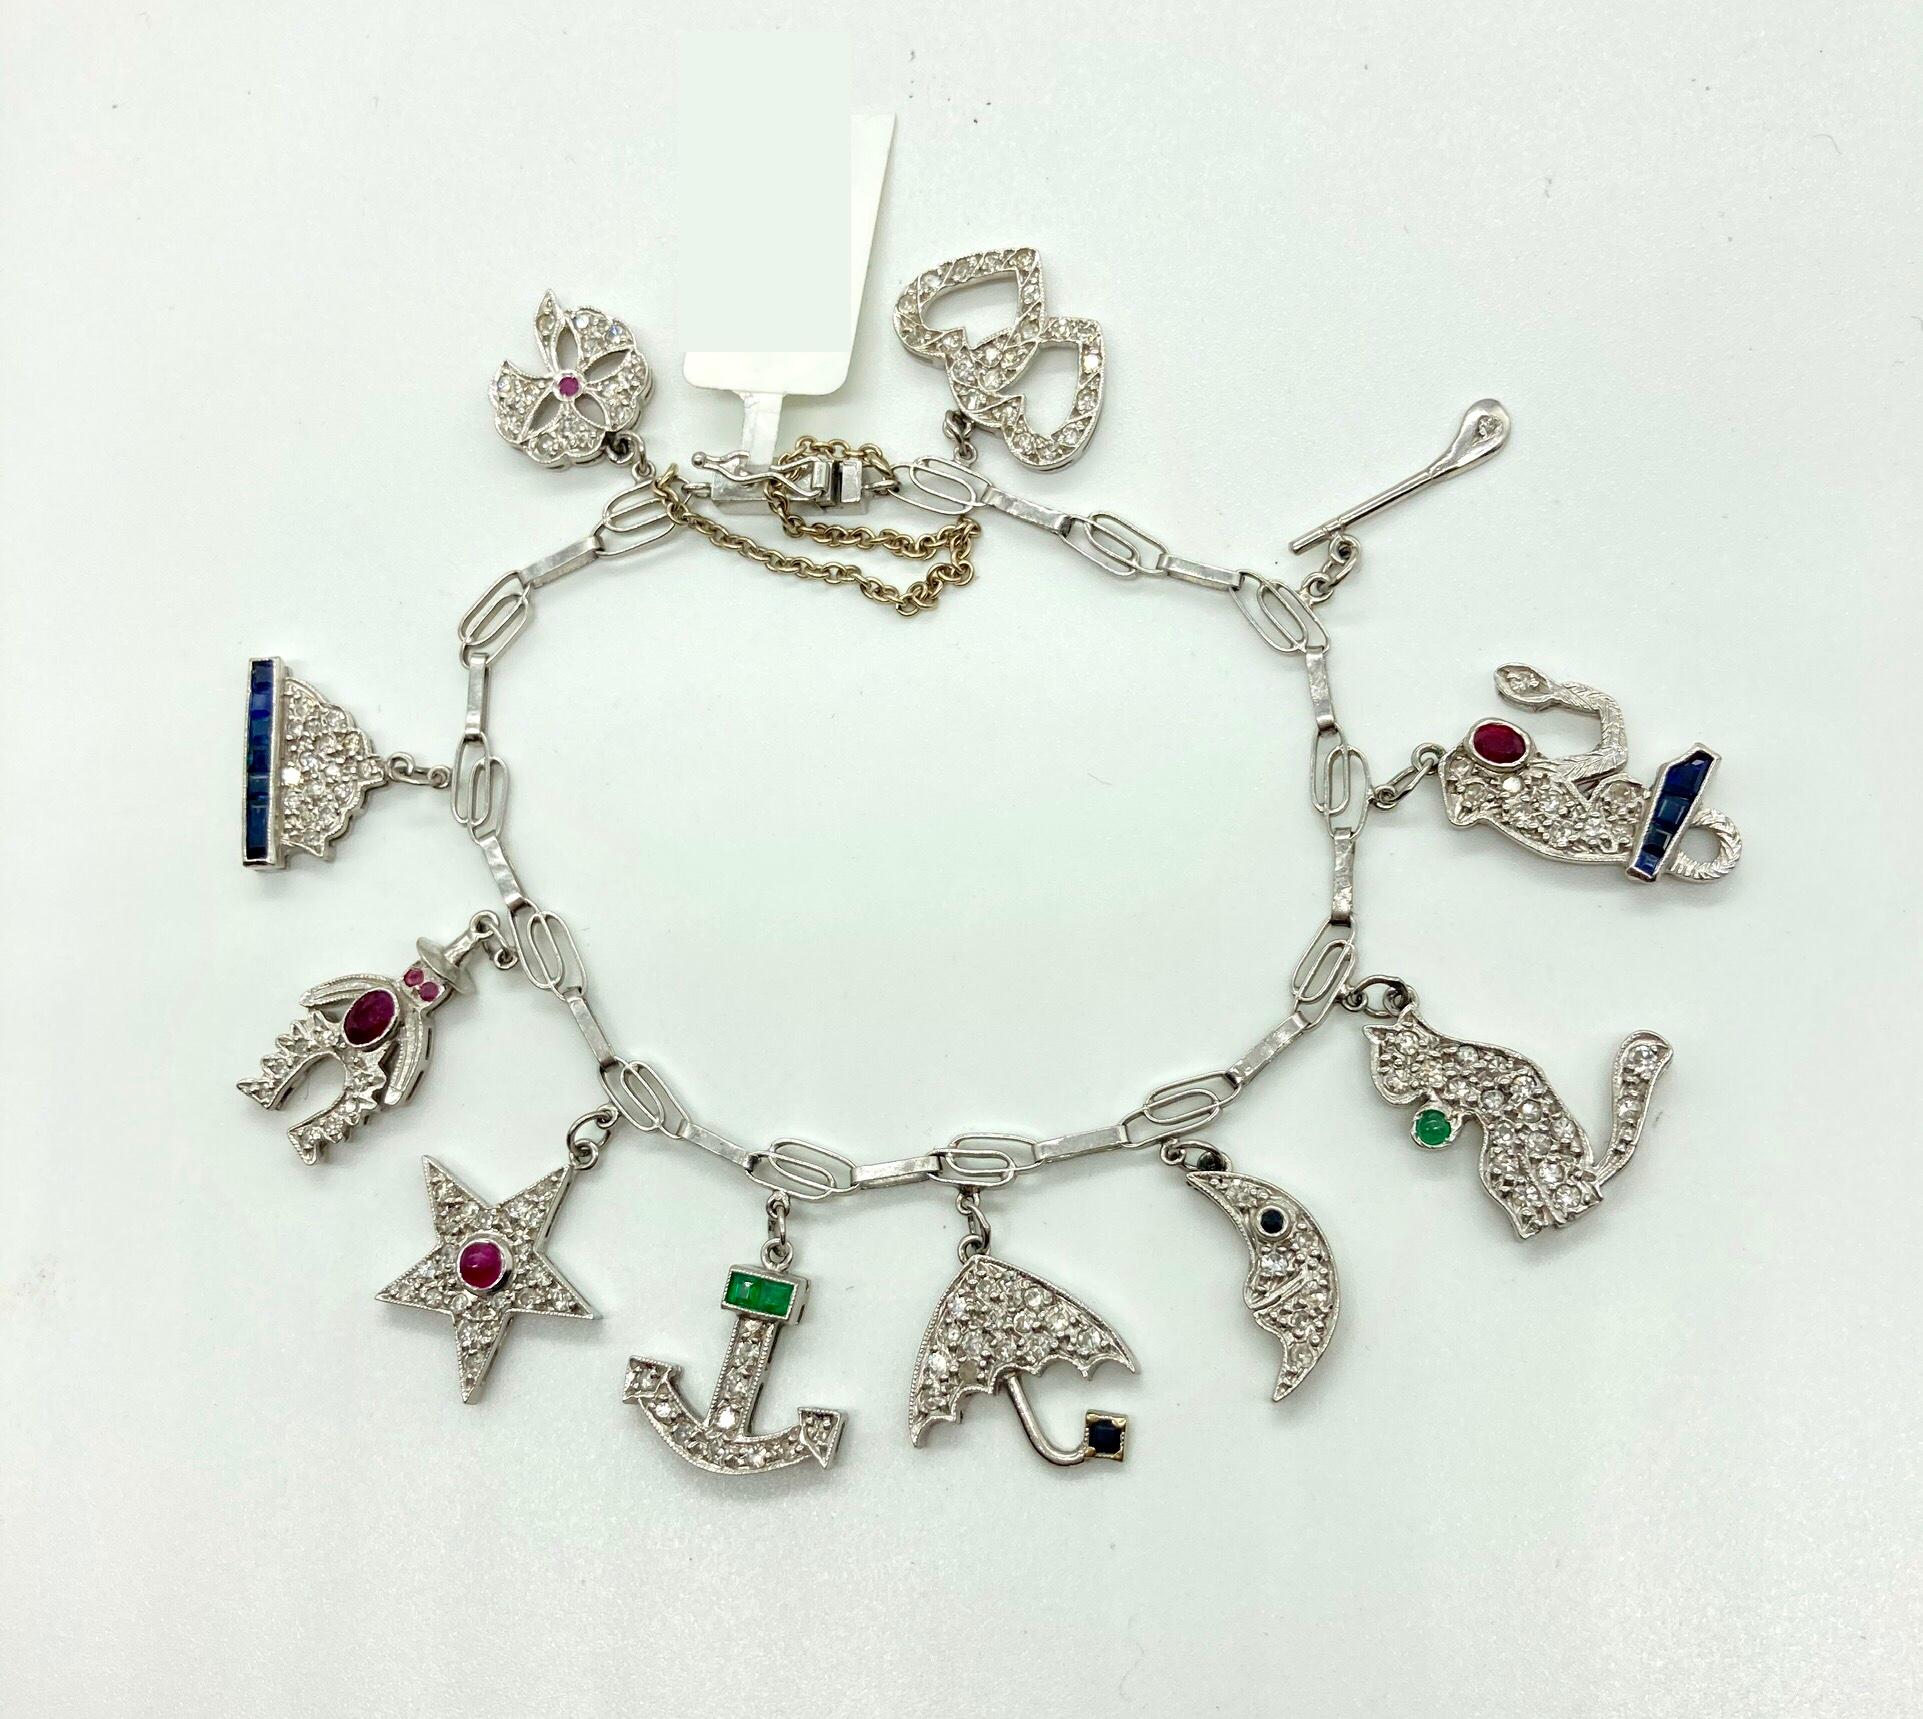 A beautiful white gold charm bracelet from the 1930s embellished with diamonds, emeralds, rubies, and sapphires.